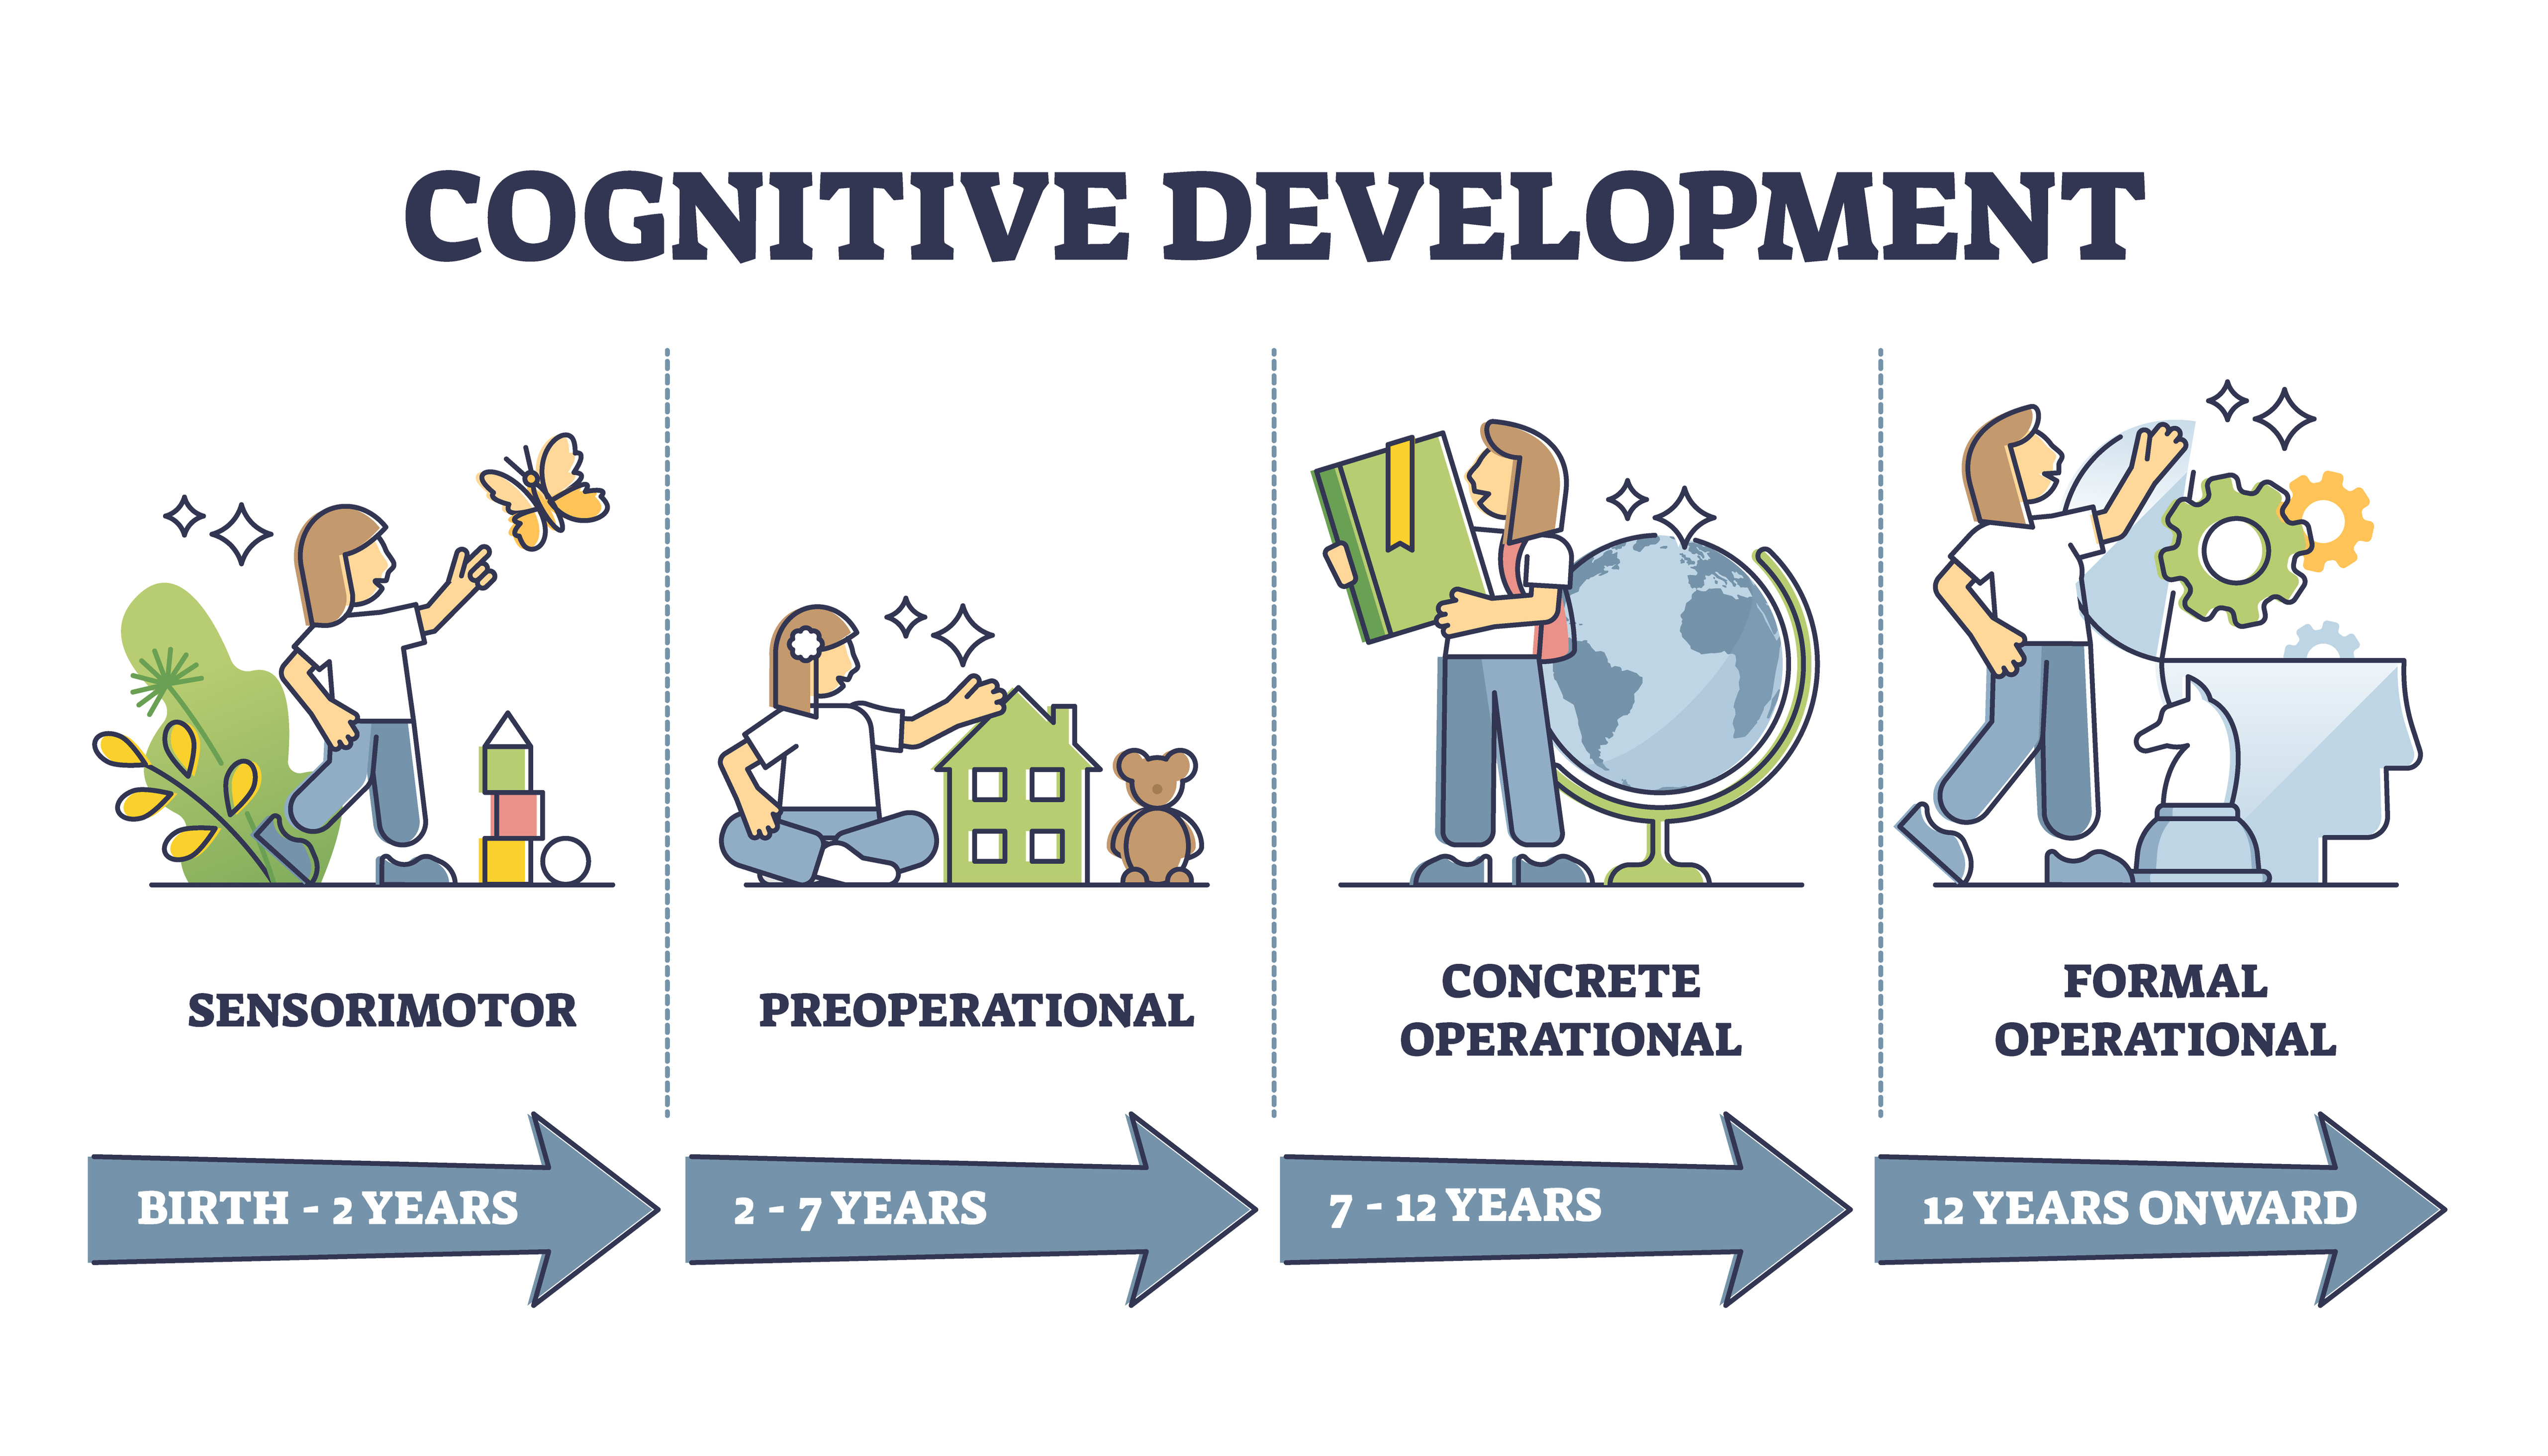 Diagram showing the stages of cognitive development. Sensorimotor from birth to 2 years. Pre-operational from 2 to 7 years. Concrete operational from 7 to 12 years. Formal operational from 2 years onward.